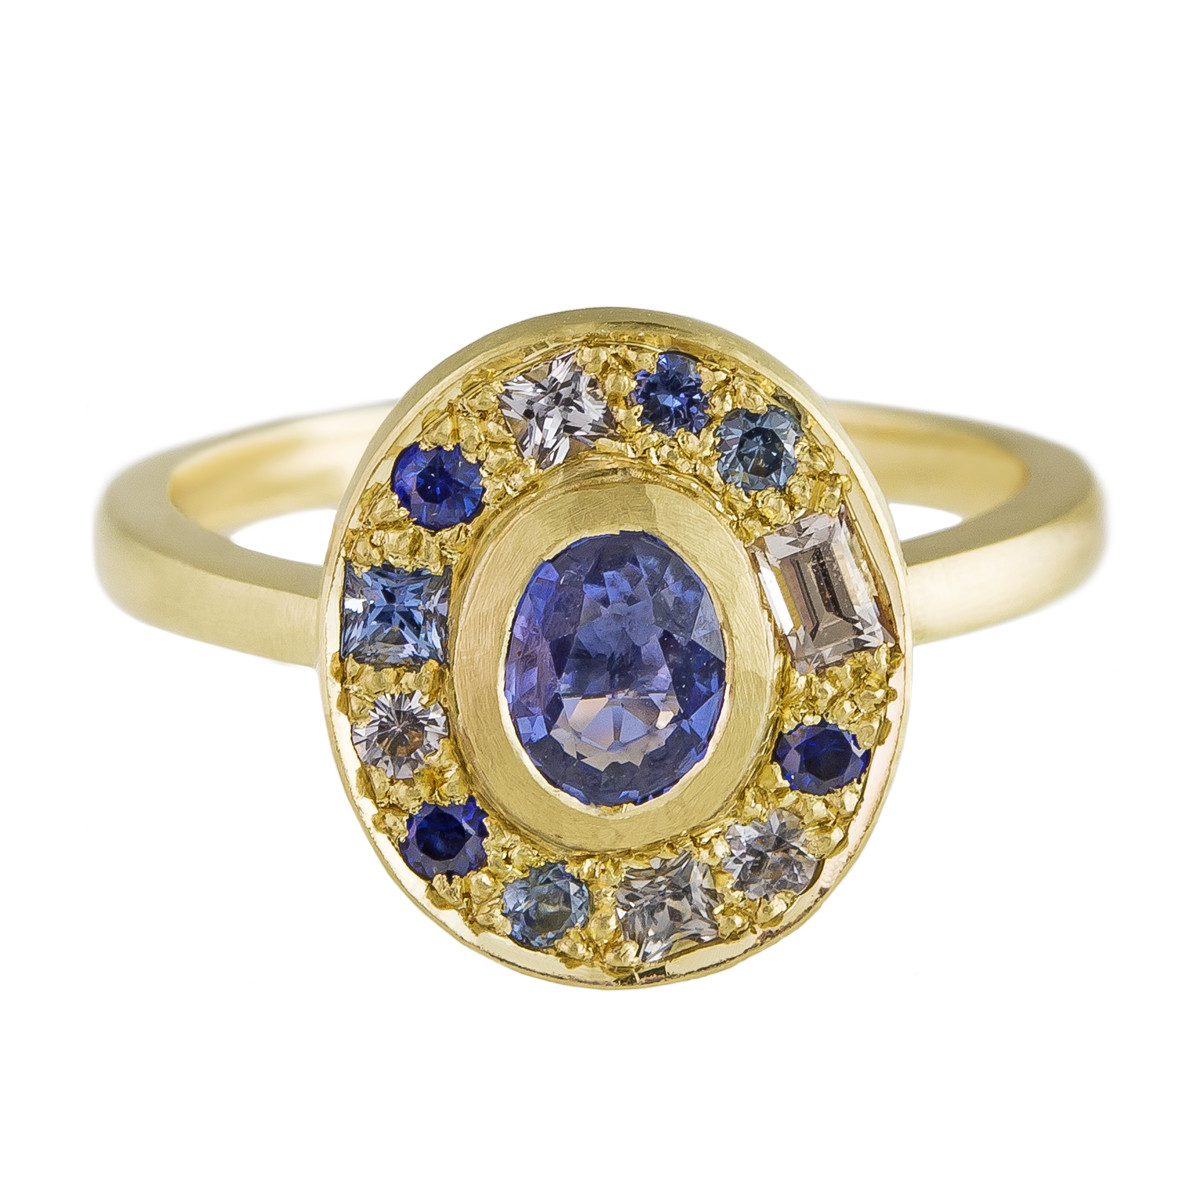 Muse by tomfoolery, 18ct Yellow Gold Puzzle Royal Blue Oval Sapphire Ring, Tomfoolery